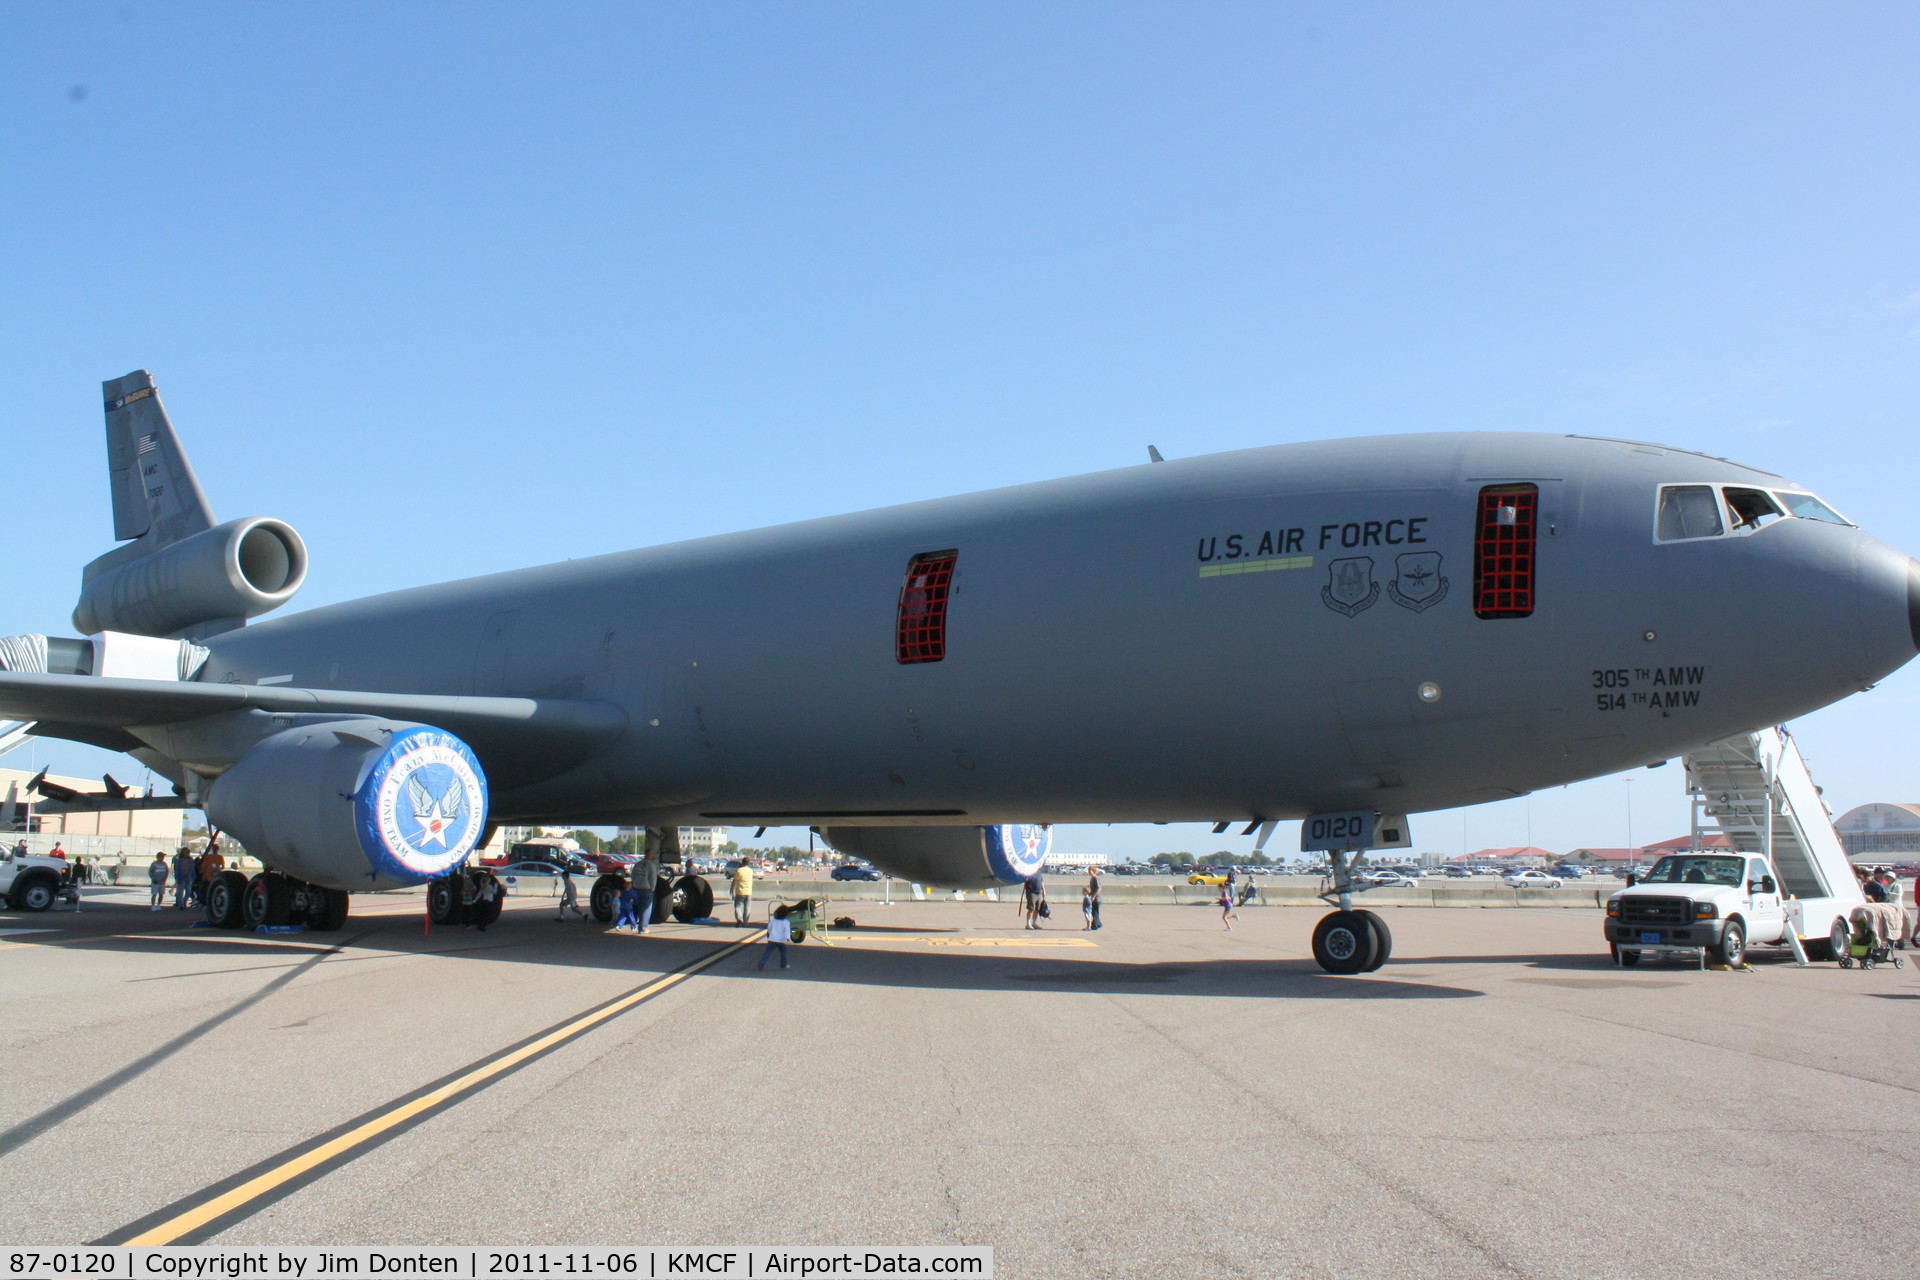 87-0120, 1987 McDonnell Douglas KC-10A Extender C/N 48306, KC-10A Extender (87-0120) from the 305th/514th Air Mobility Wing at McGuire Air Force Base sits on display at MacDill Air Fest